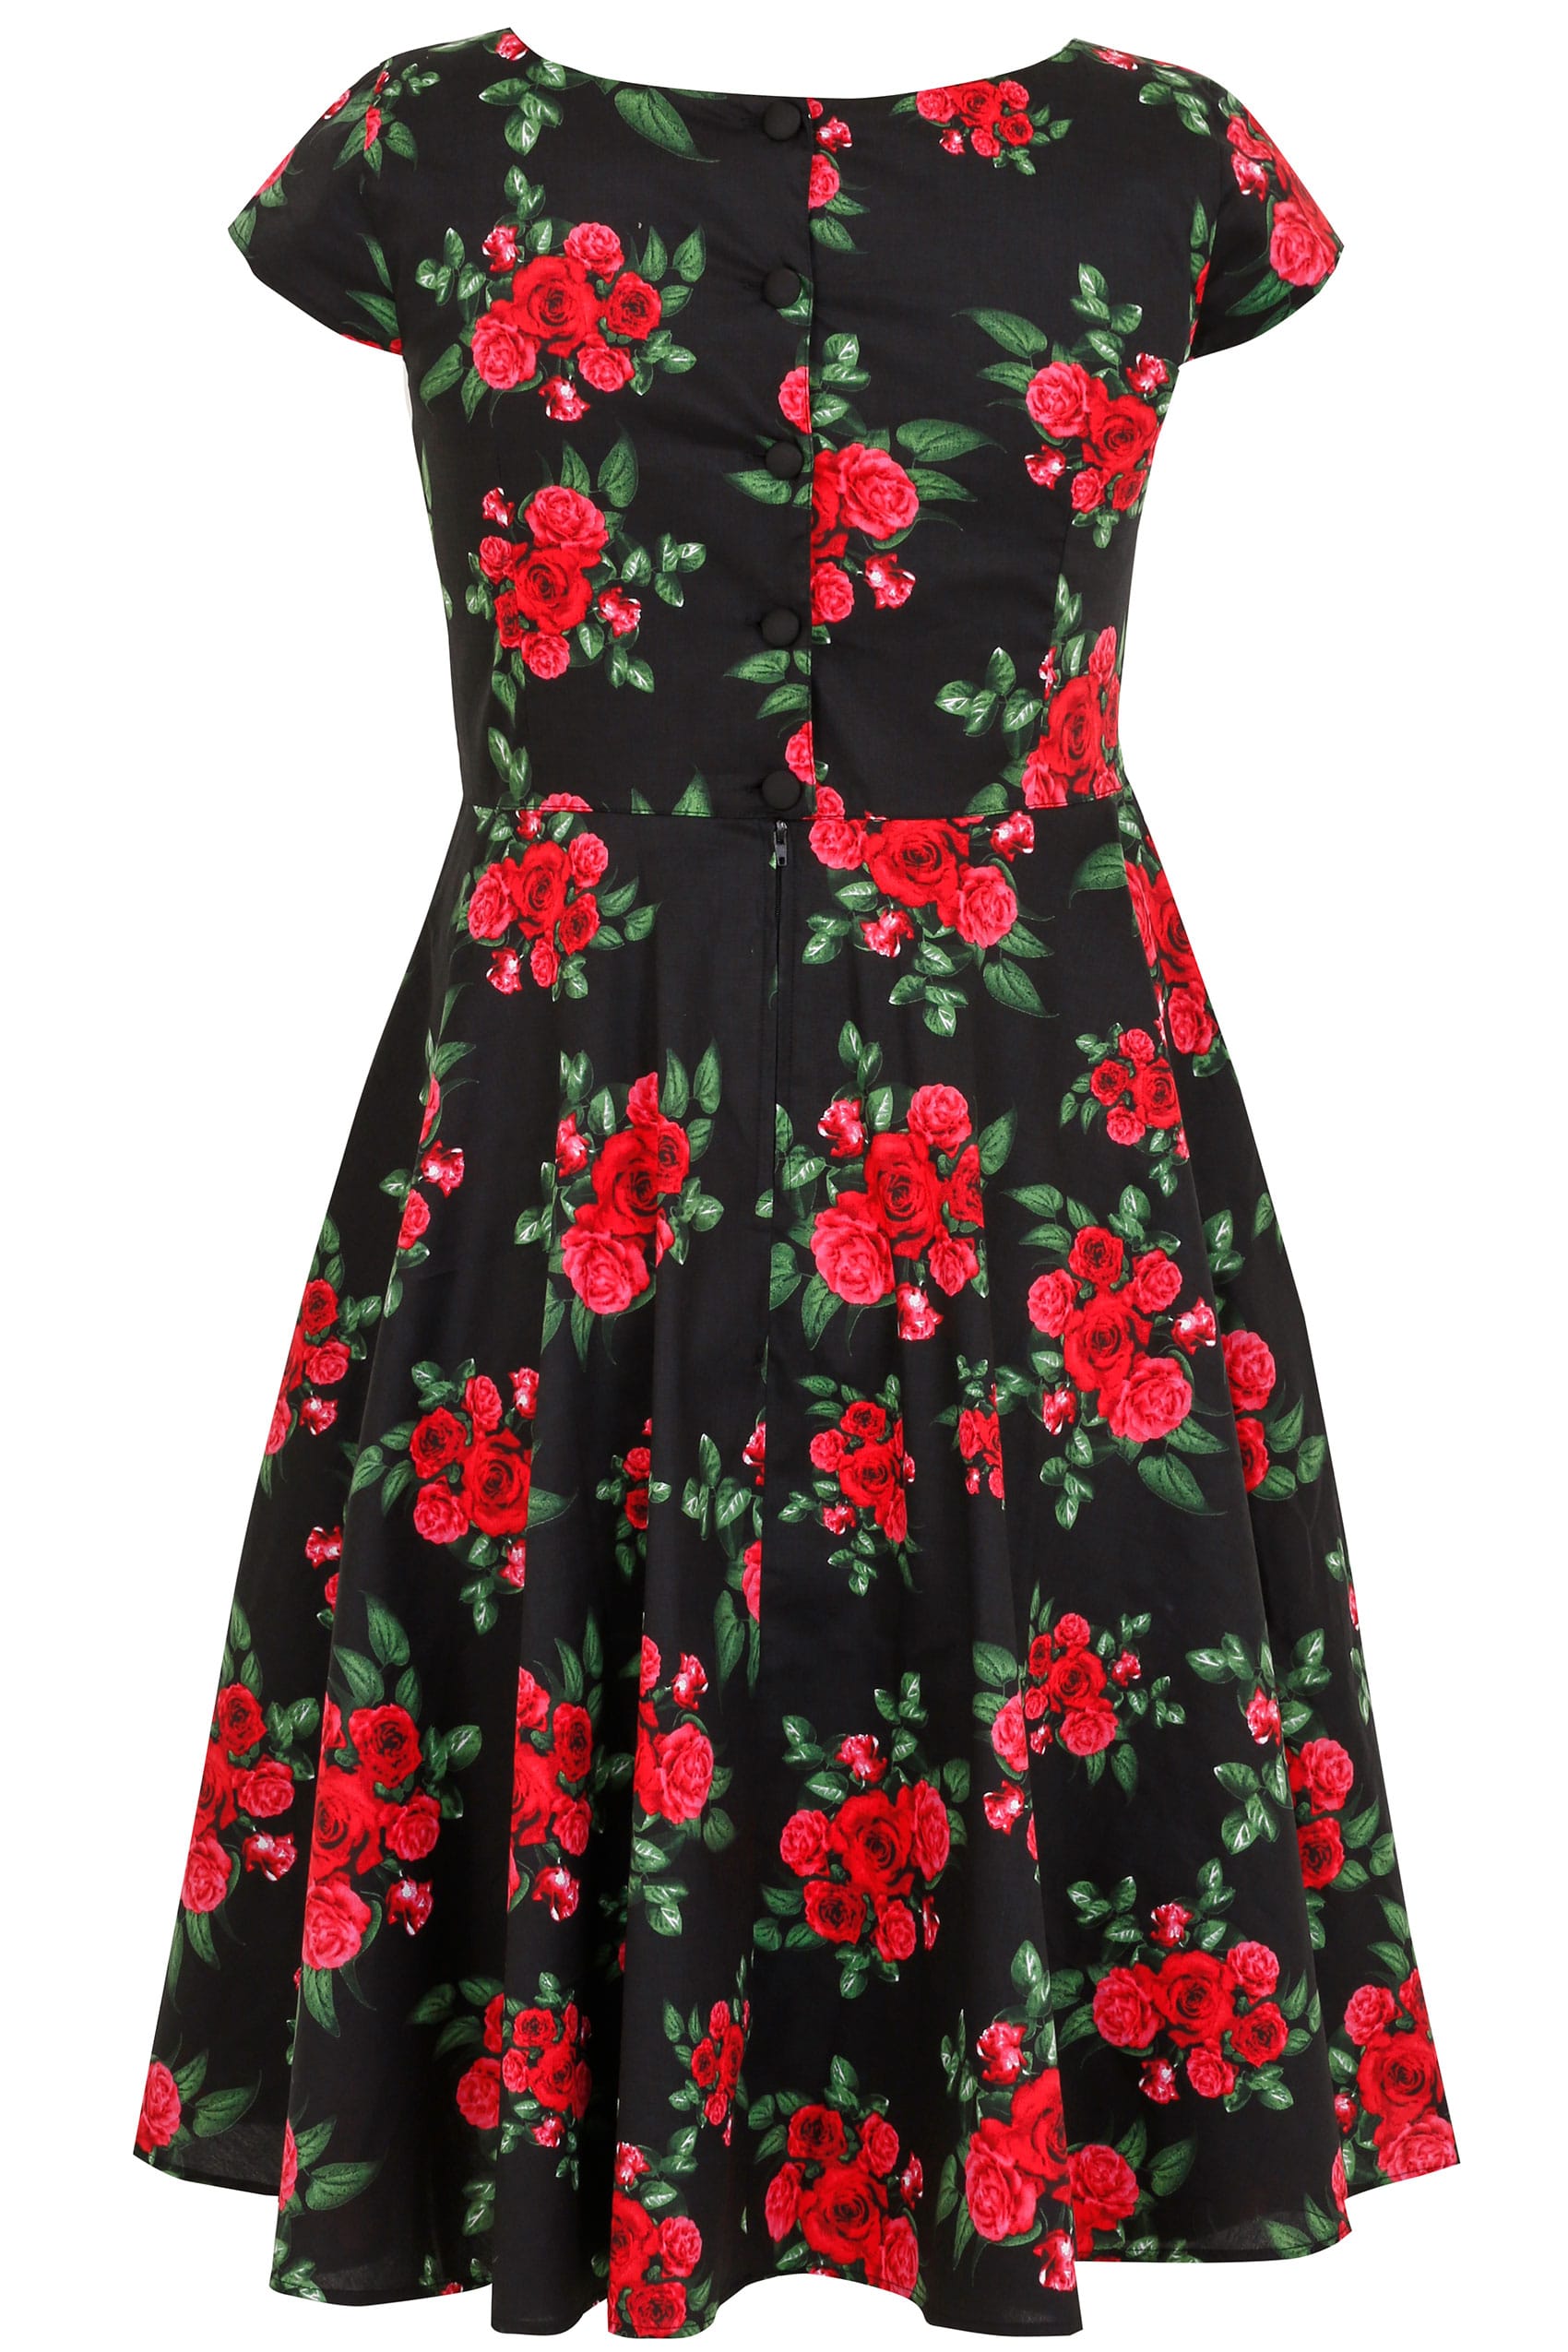 HELL BUNNY Black & Red Rose Print 50s Style Midi Dress plus size 16 to 32